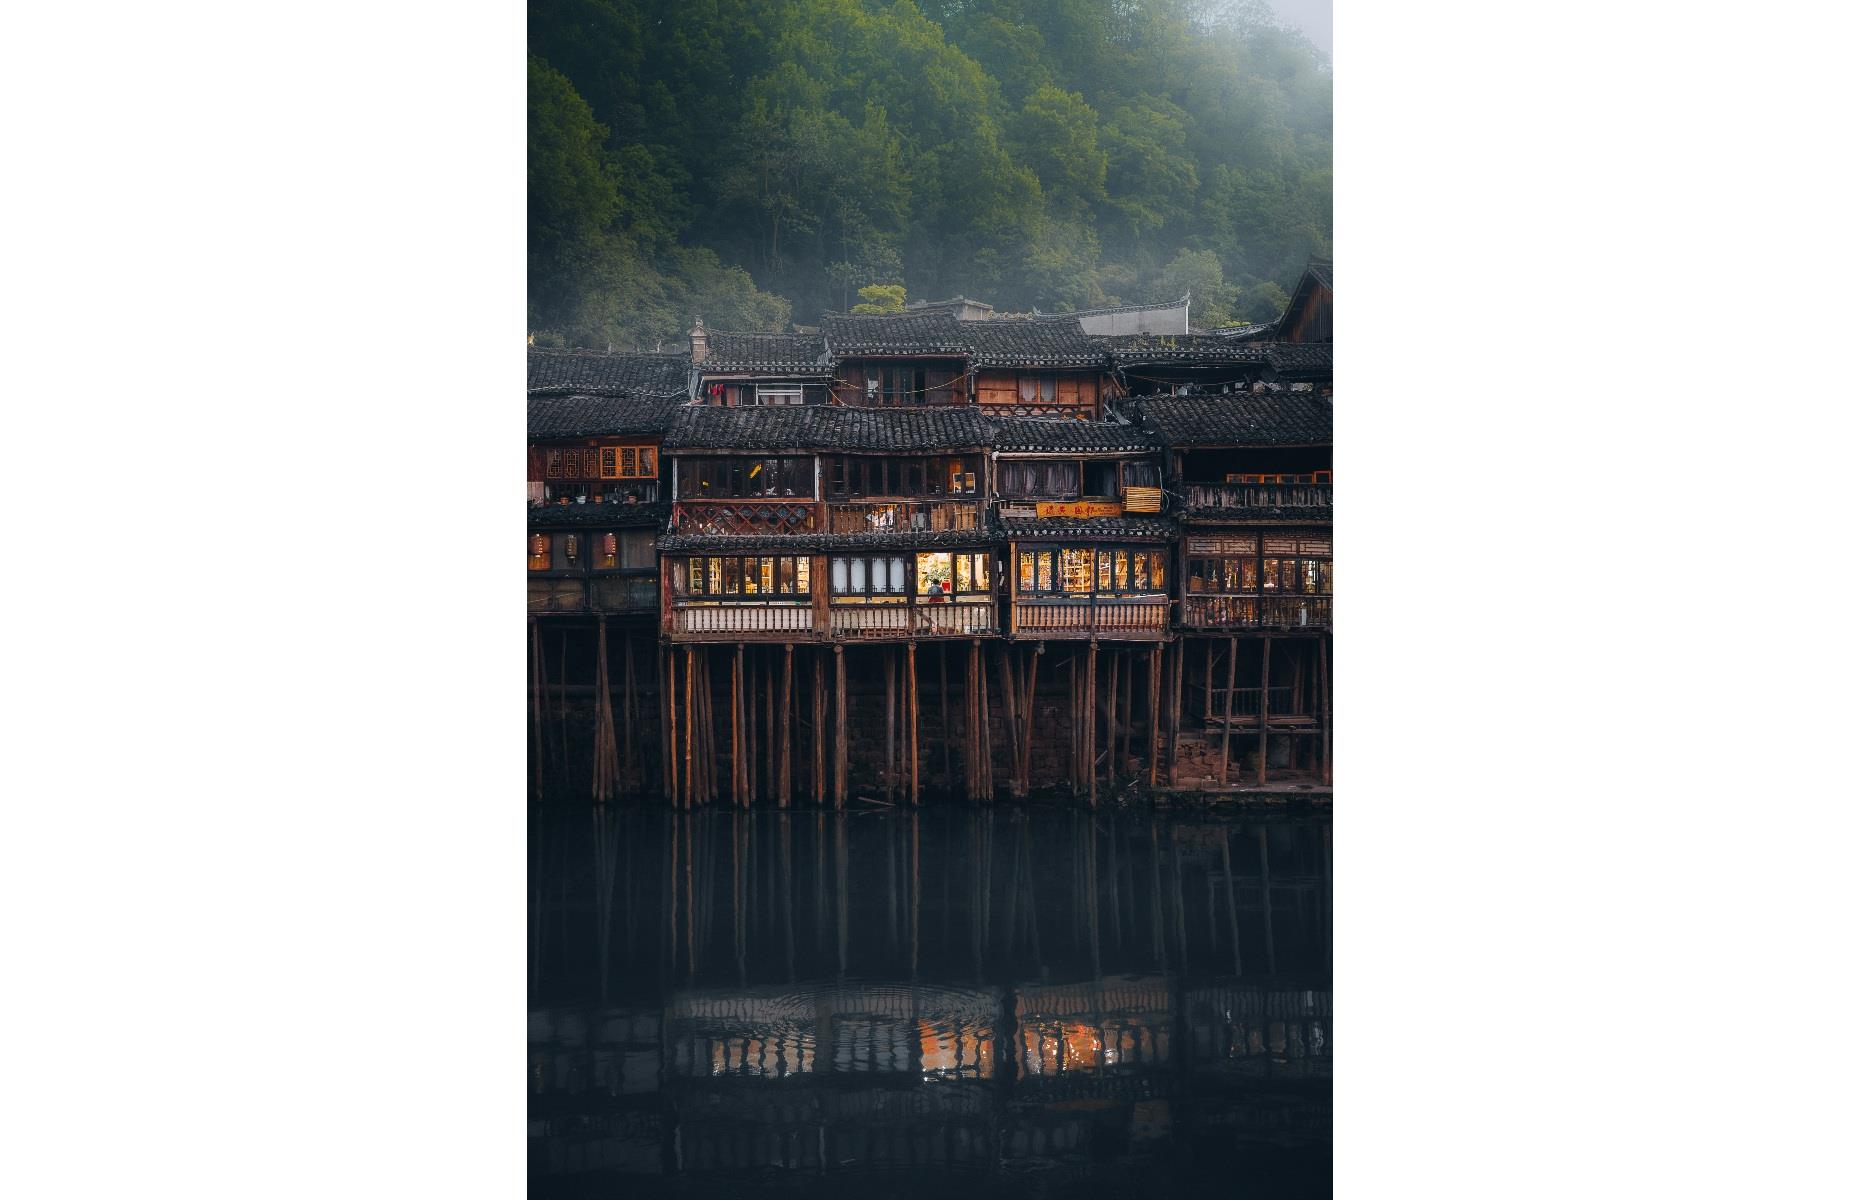 Frequently ranked among the most beautiful towns in China, the ancient settlement of Fenghuang is captured in all its glory in this gorgeous photograph, which won Luke Stackpoole top place in the World History category. Dating back more than 400 years, the town is exceptionally well-preserved and has unique ethnic languages, customs, arts as well as many distinctive architectural remains of Ming and Qing styles.